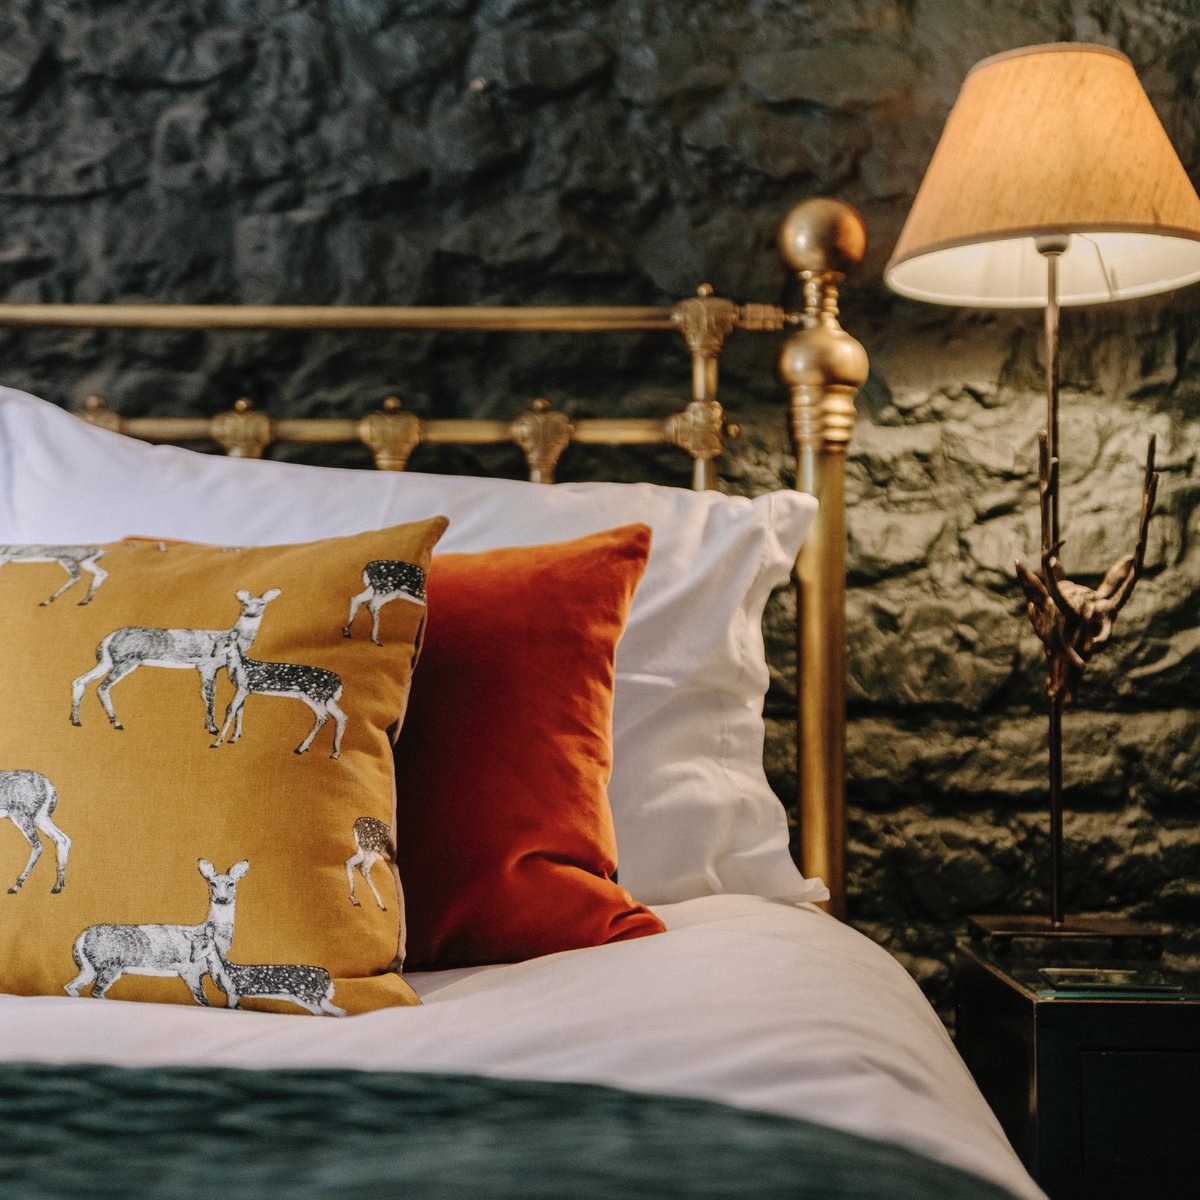 The perfect retreat following your dining delight.

Ease into comfort within our 13 unique rooms and cottages, each brimming with charm.

Visit our website to book your cosy Norfolk hideaway.

#restaurantwithrooms #foodietrip #thegintrapinn #pubwithrooms